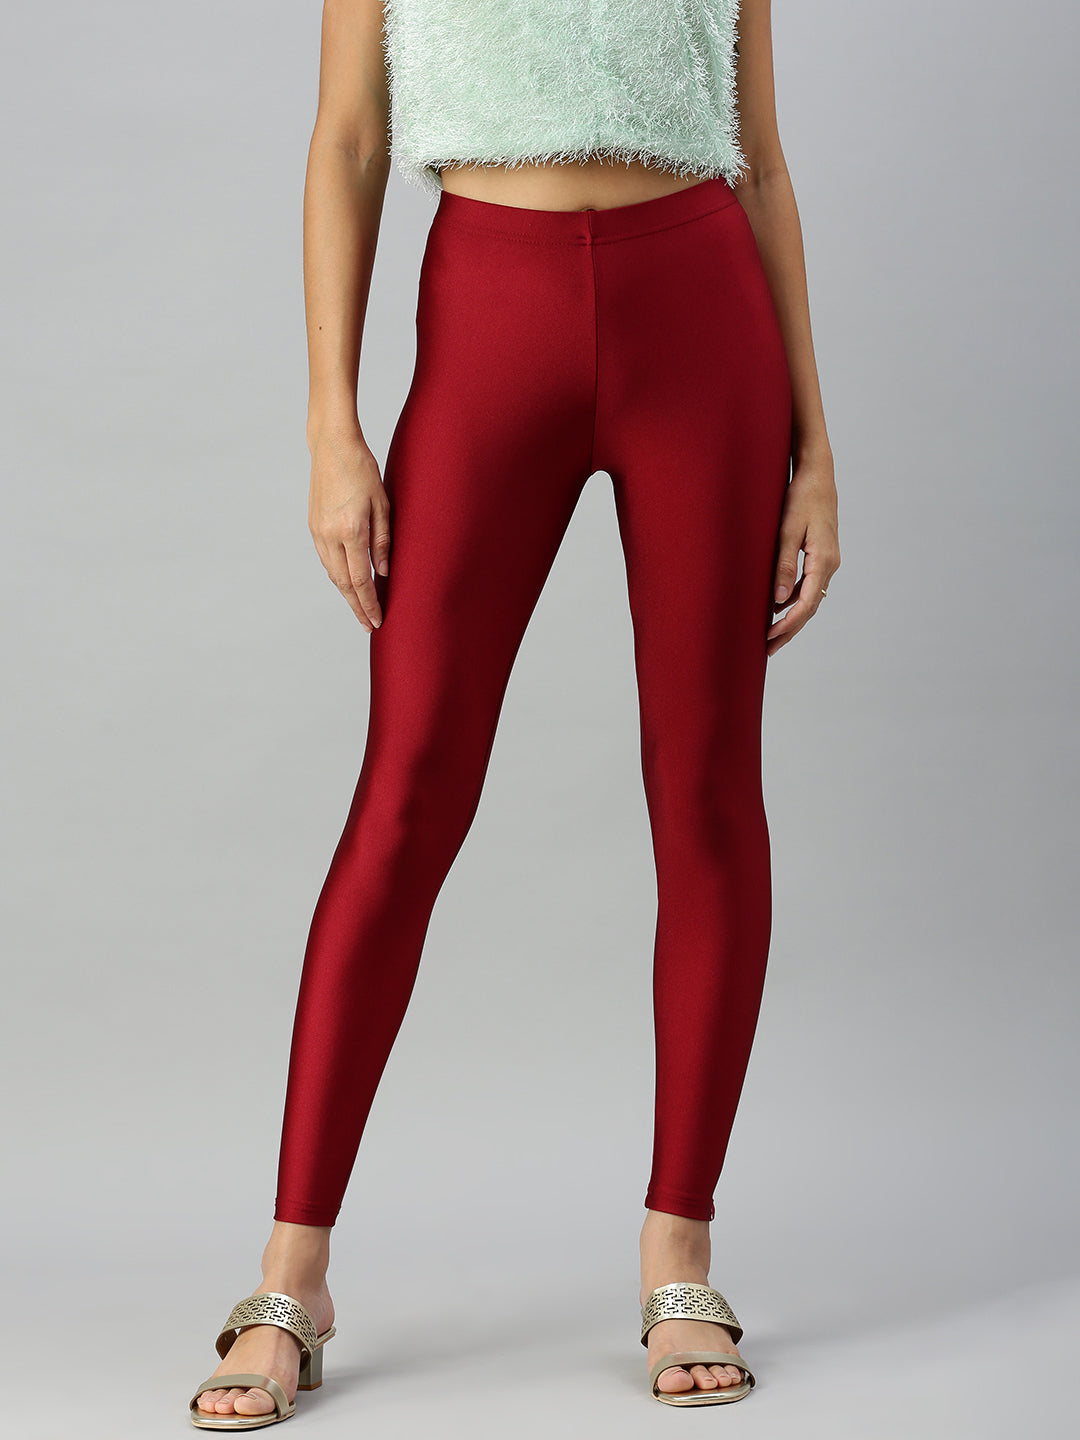 Prisma Legging - Prisma Chust Pant Price Starting From Rs 500/Pc. Find  Verified Sellers in Chennai - JdMart